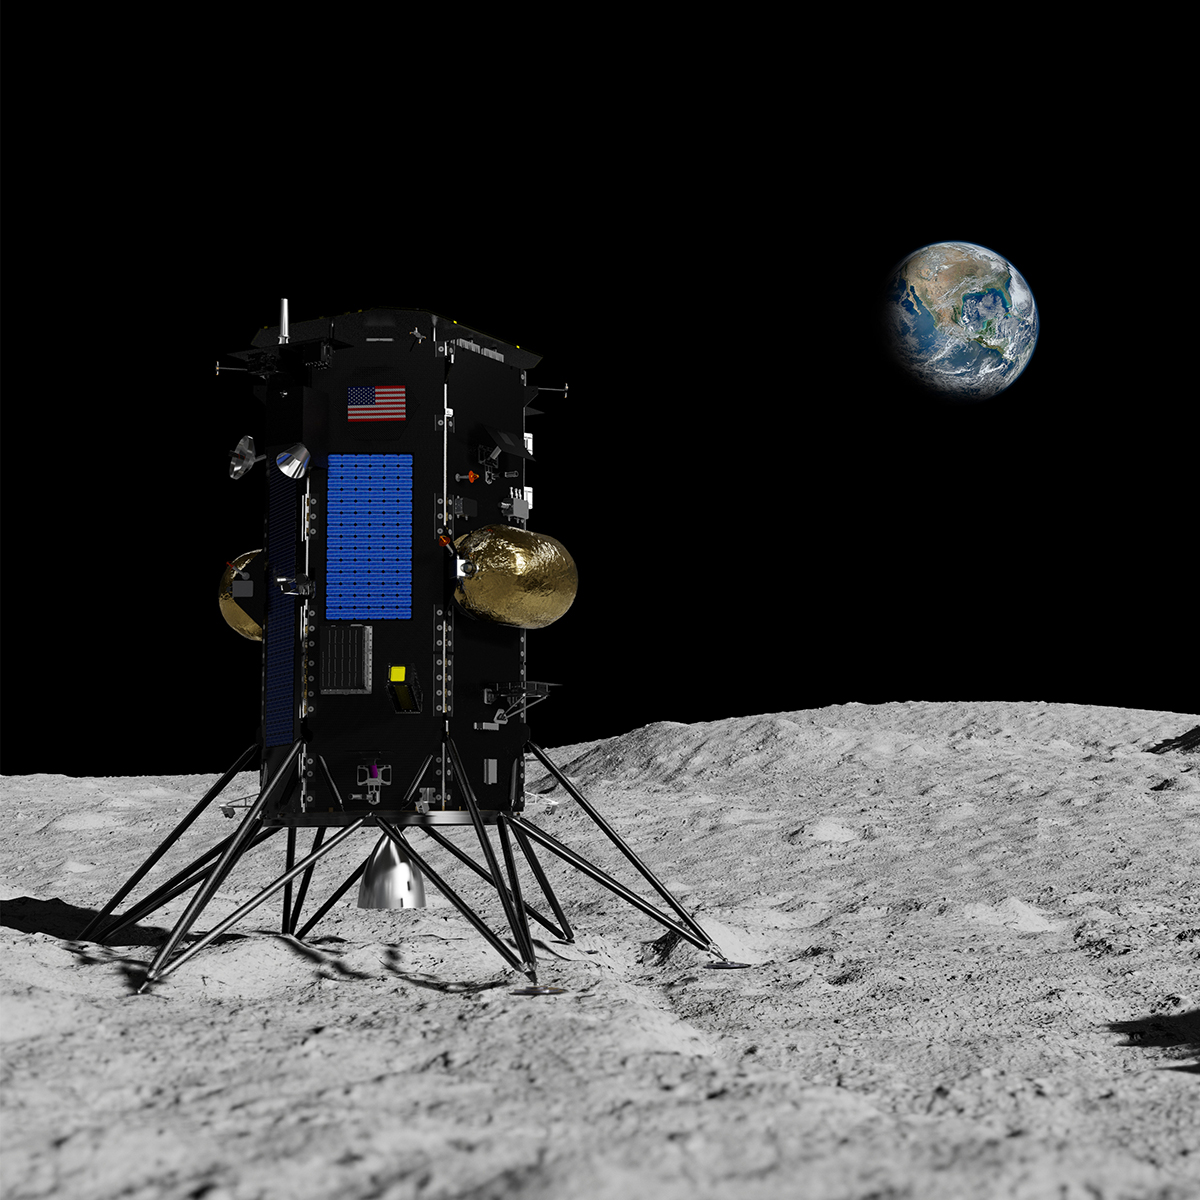 Intuitive Machines’ lunar lander stands on the Moon’s surface